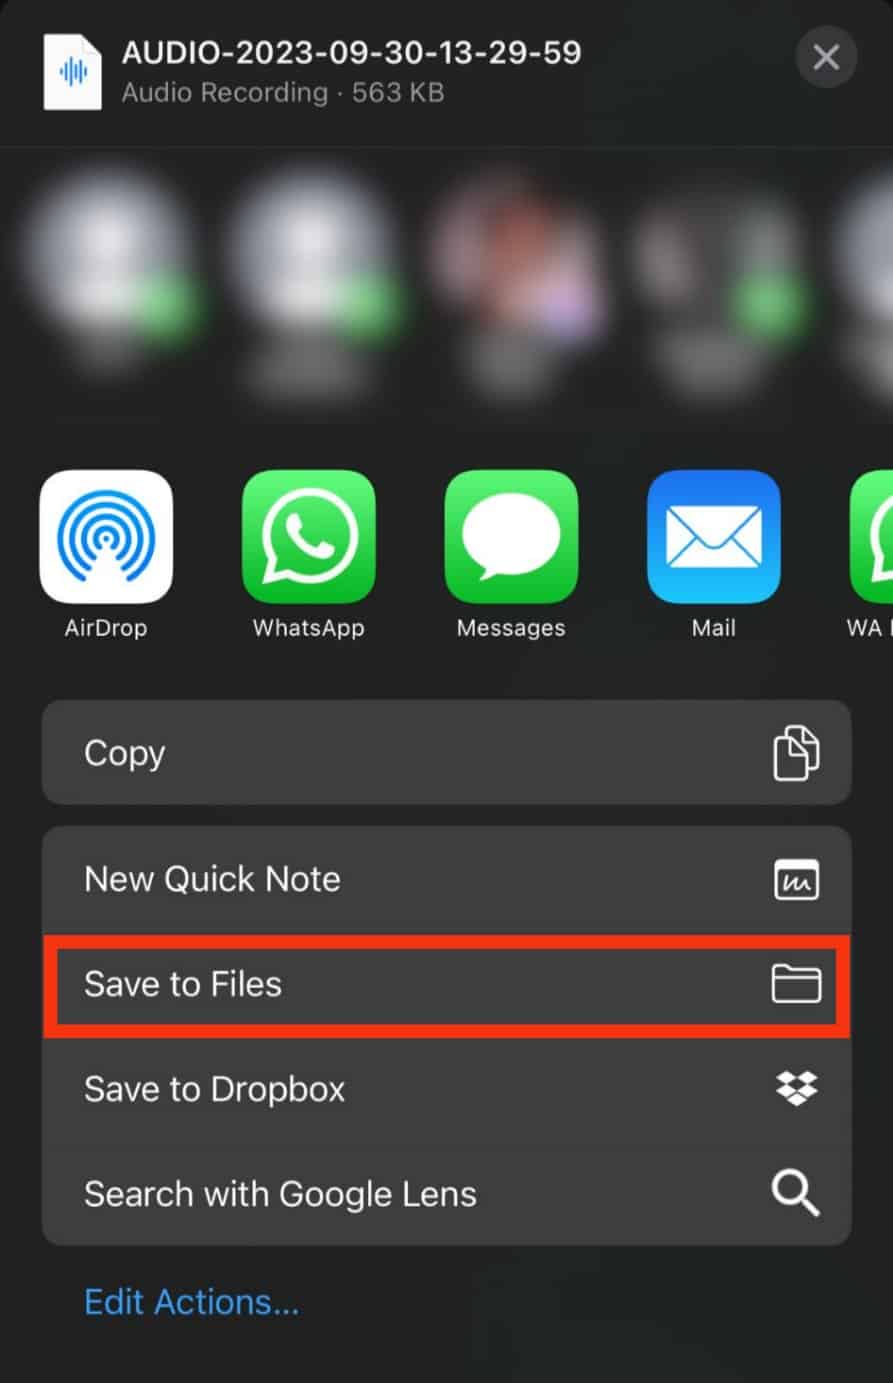 Select The Option For Save To Files